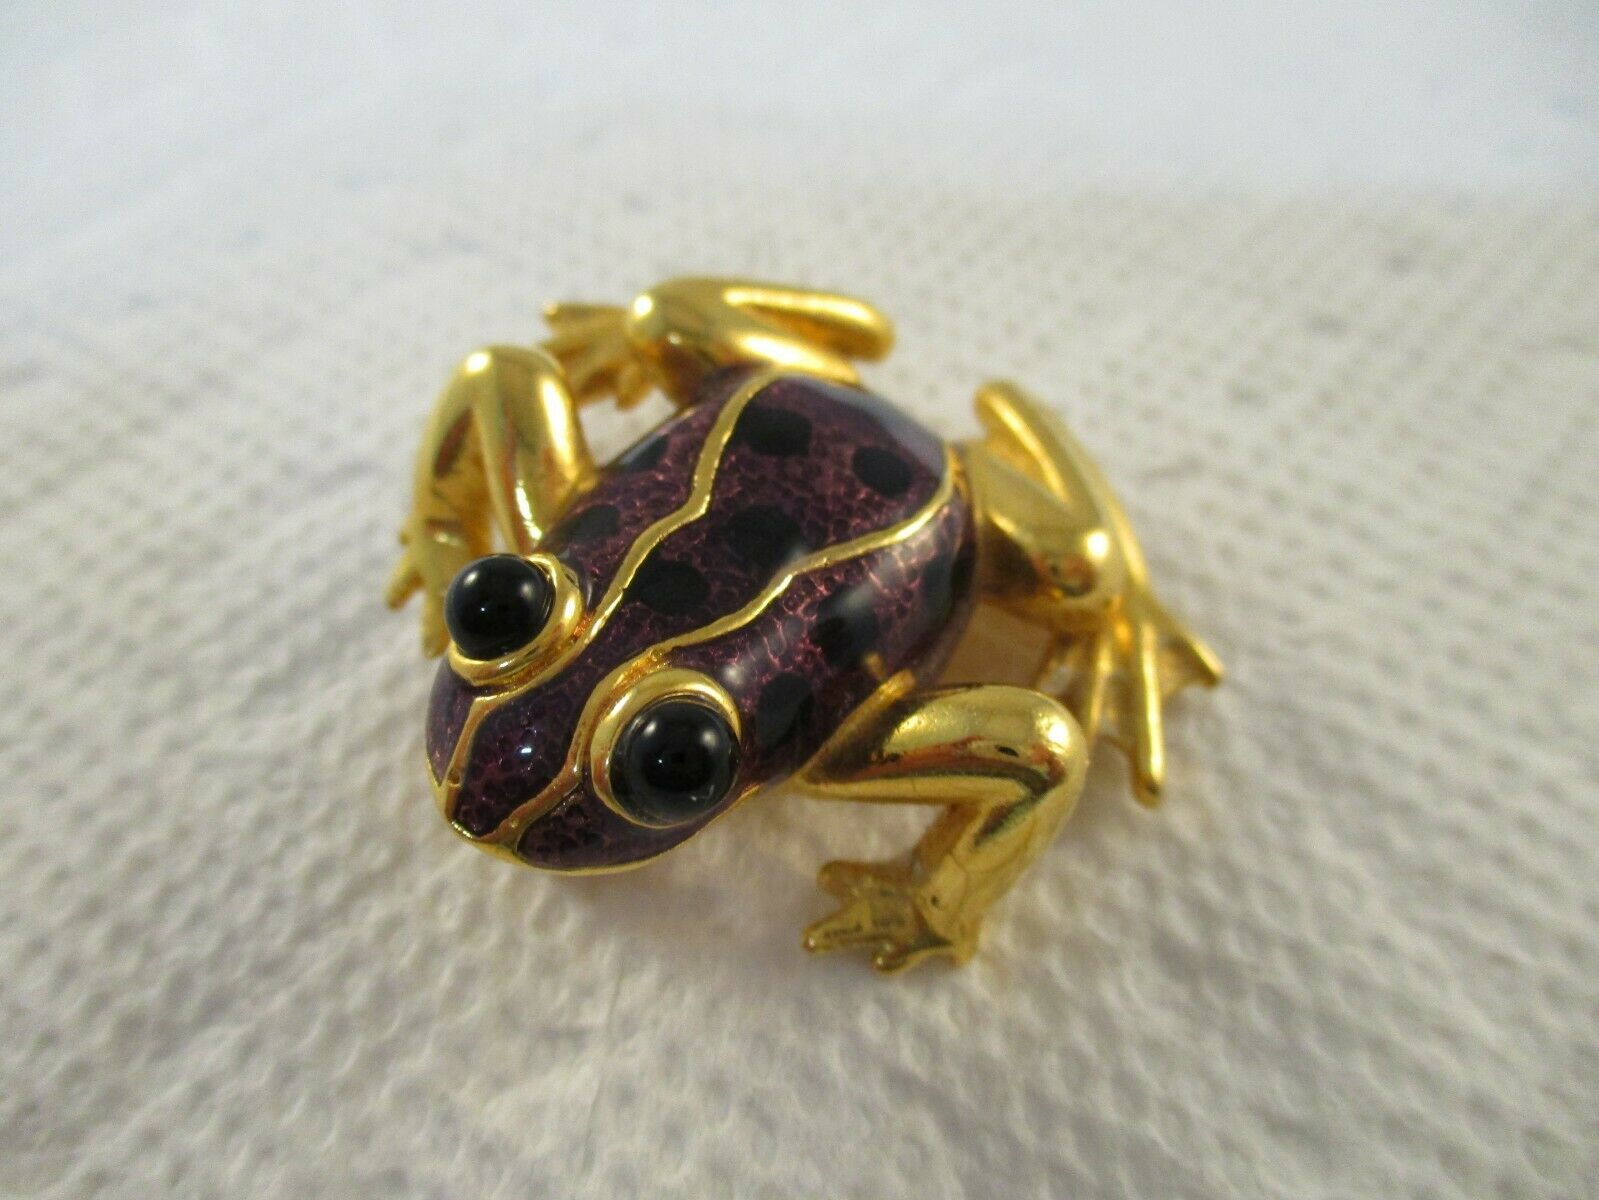 Vintage Gold Tone Brown With Black Spotted Enamel Frog Pin